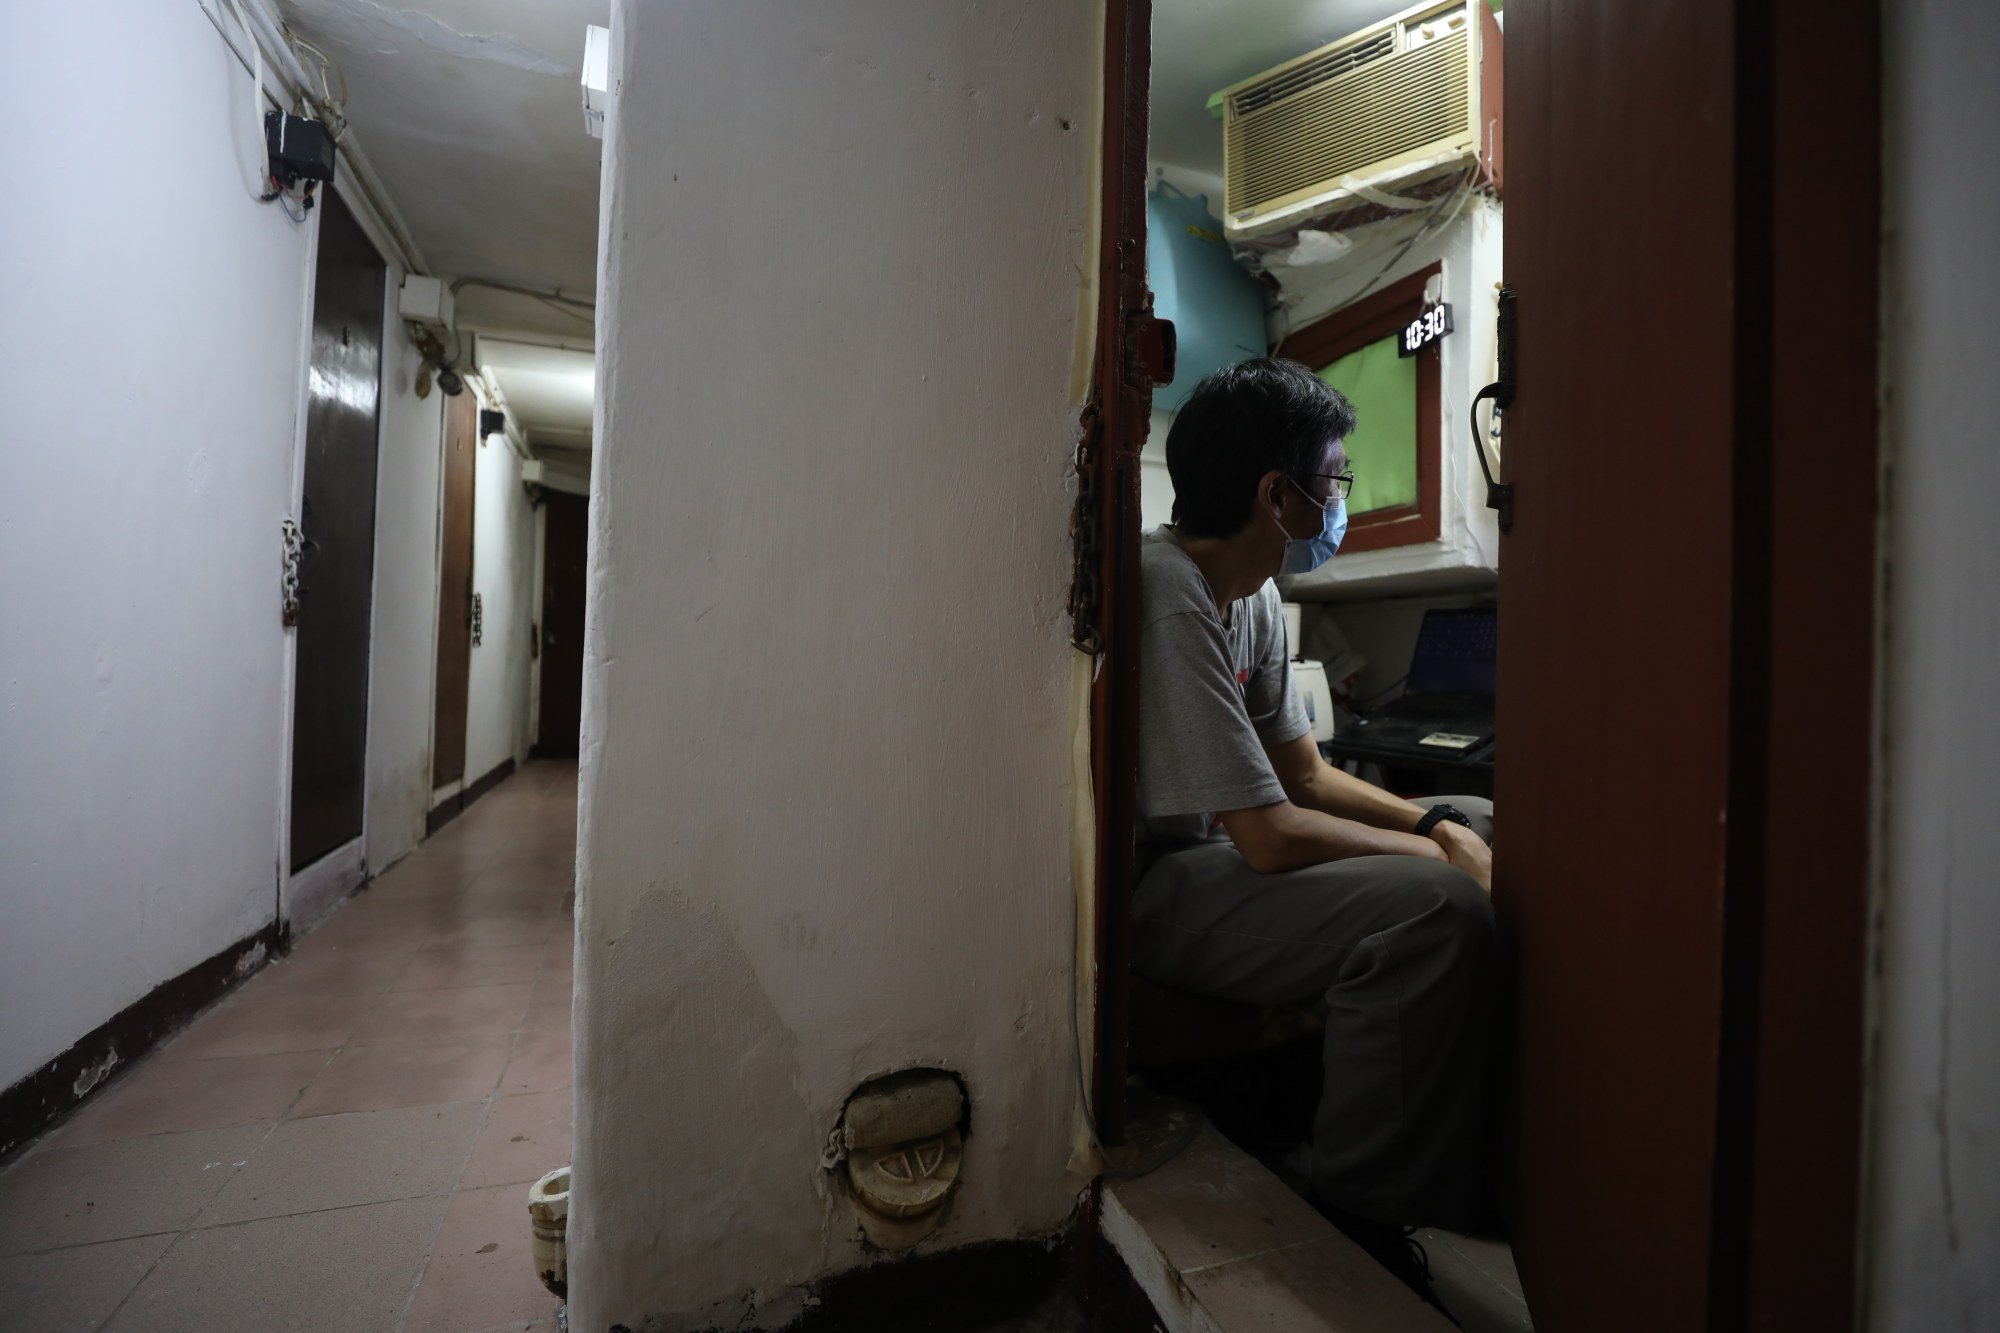 A resident at his subdivided flat in Sham Shui Po. Photo: Xiaomei Chen